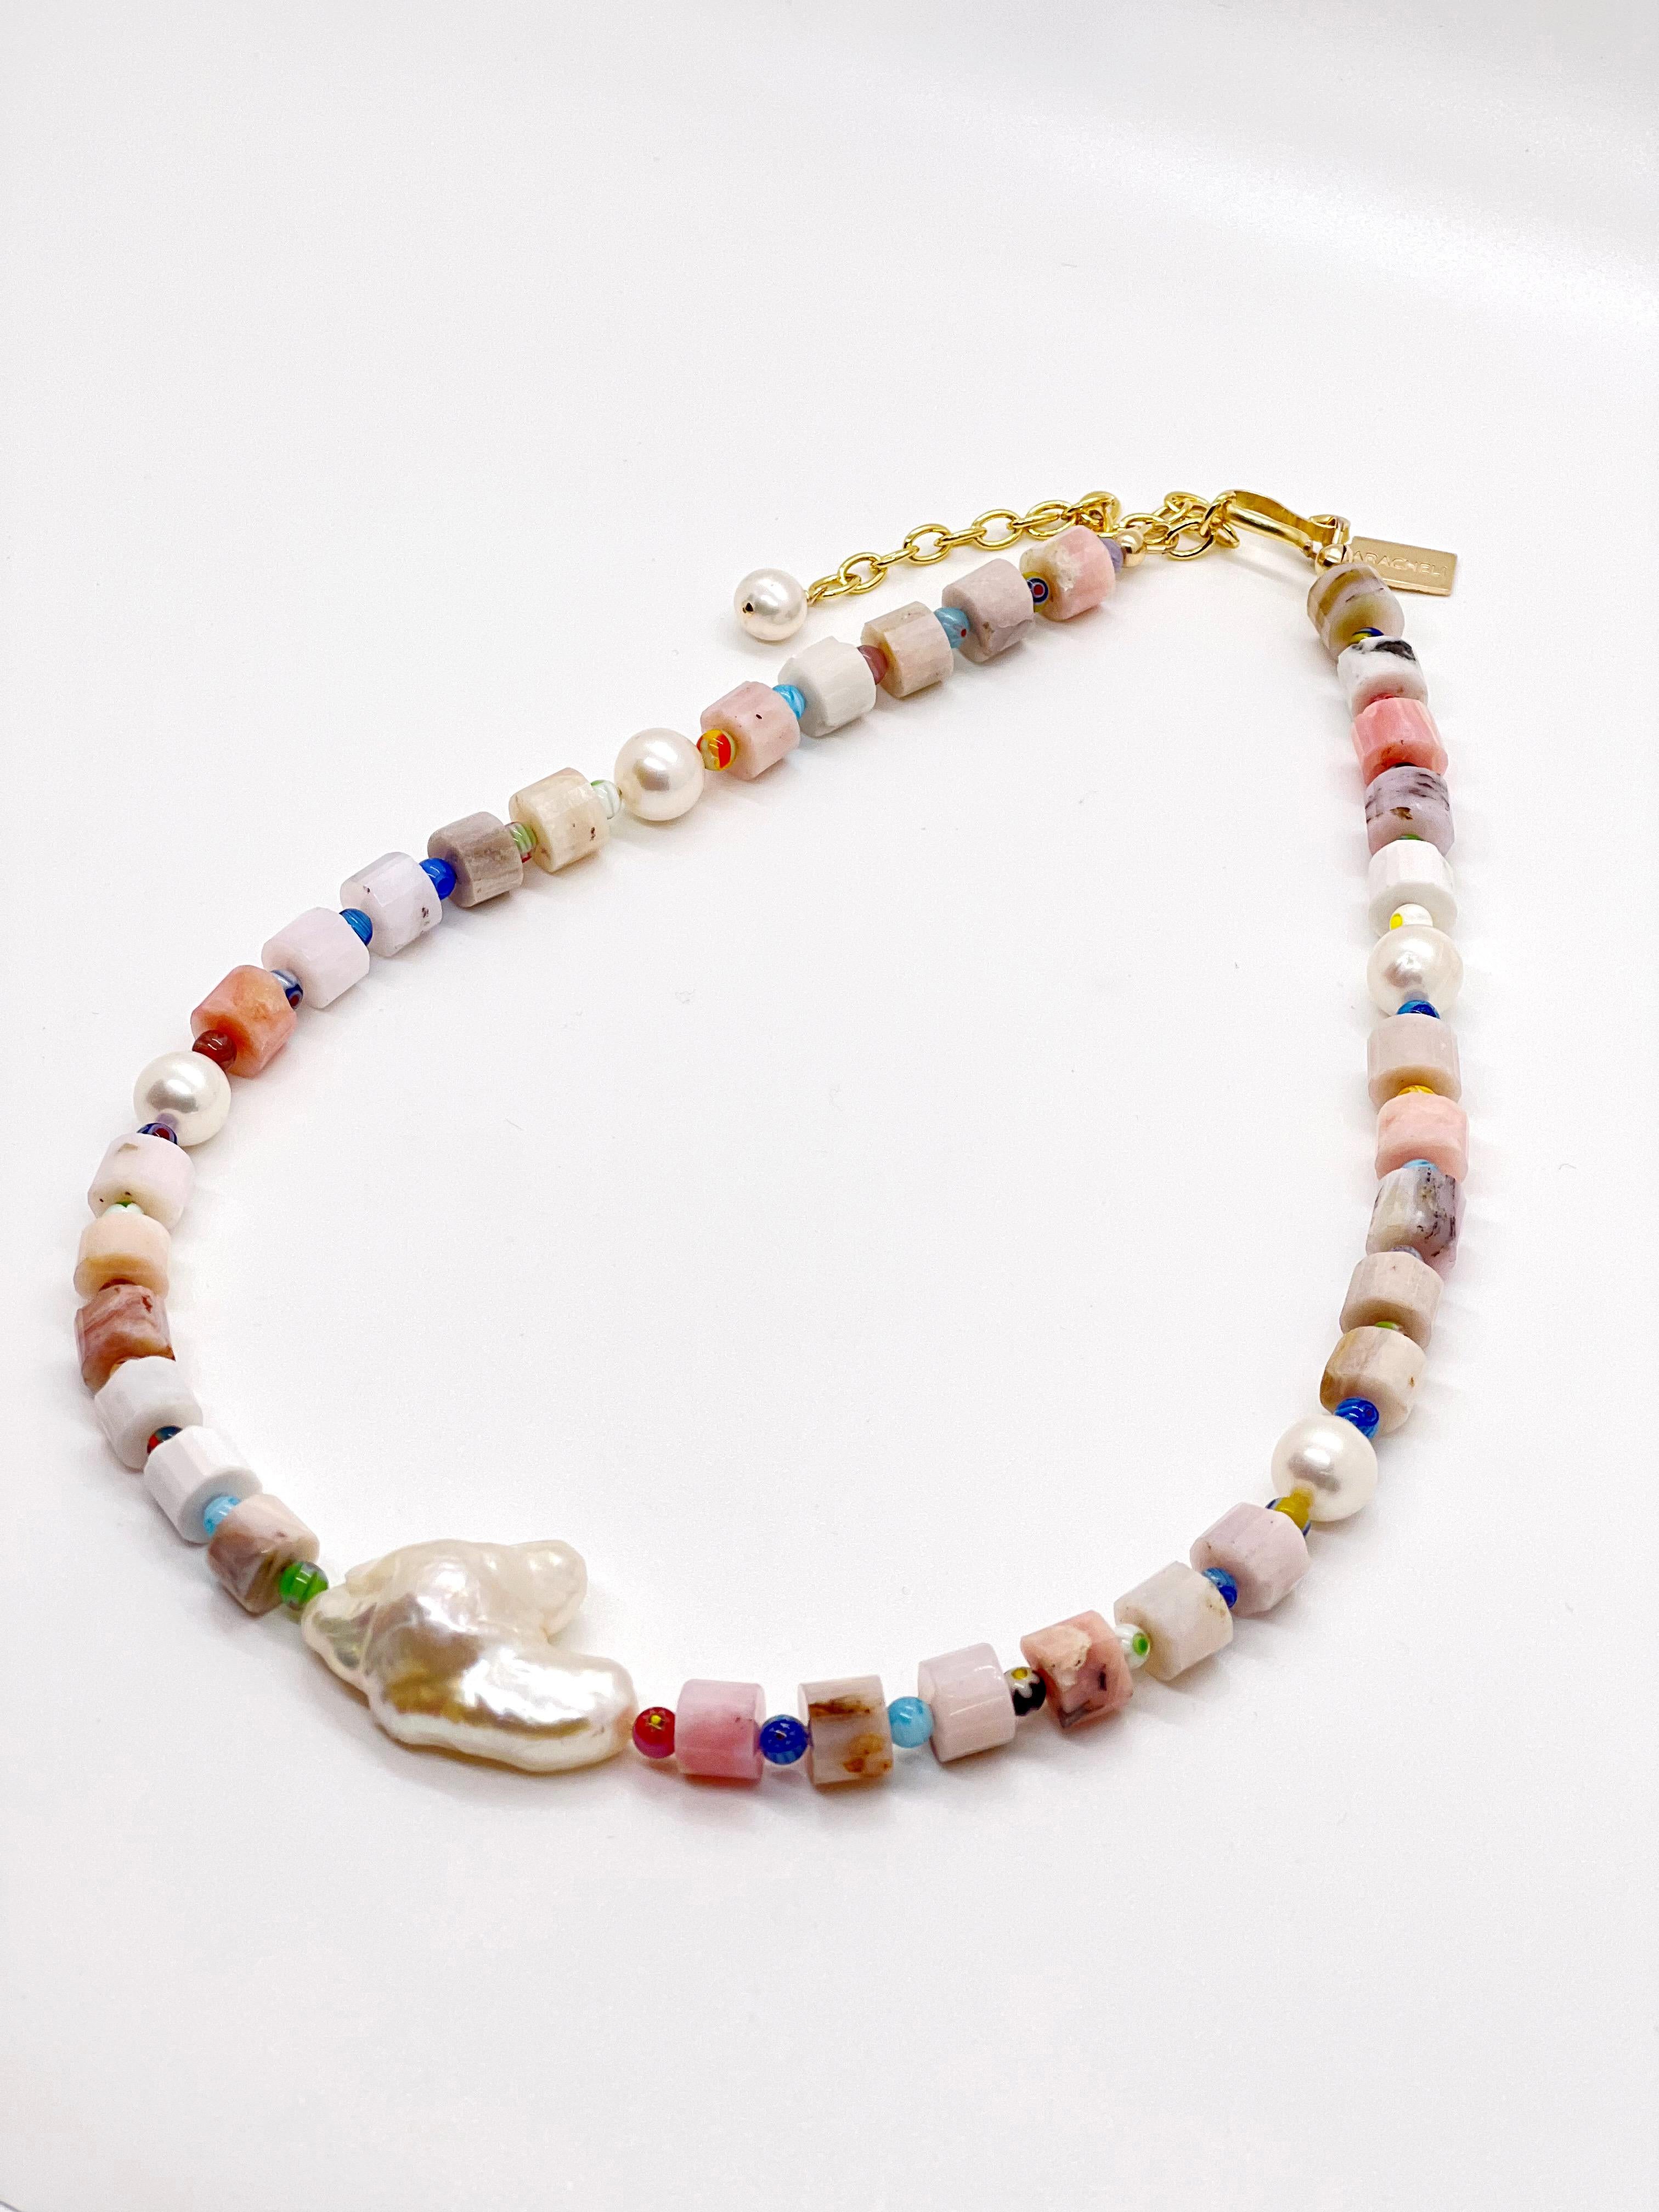 This necklace is composed of pink opal wheel beads that are complimented by vintage Mellifiori beads with a double Biwa freshwater pearl as its center piece. This is such a fun necklace meant to be worn all year round. It is measured at 17 inches